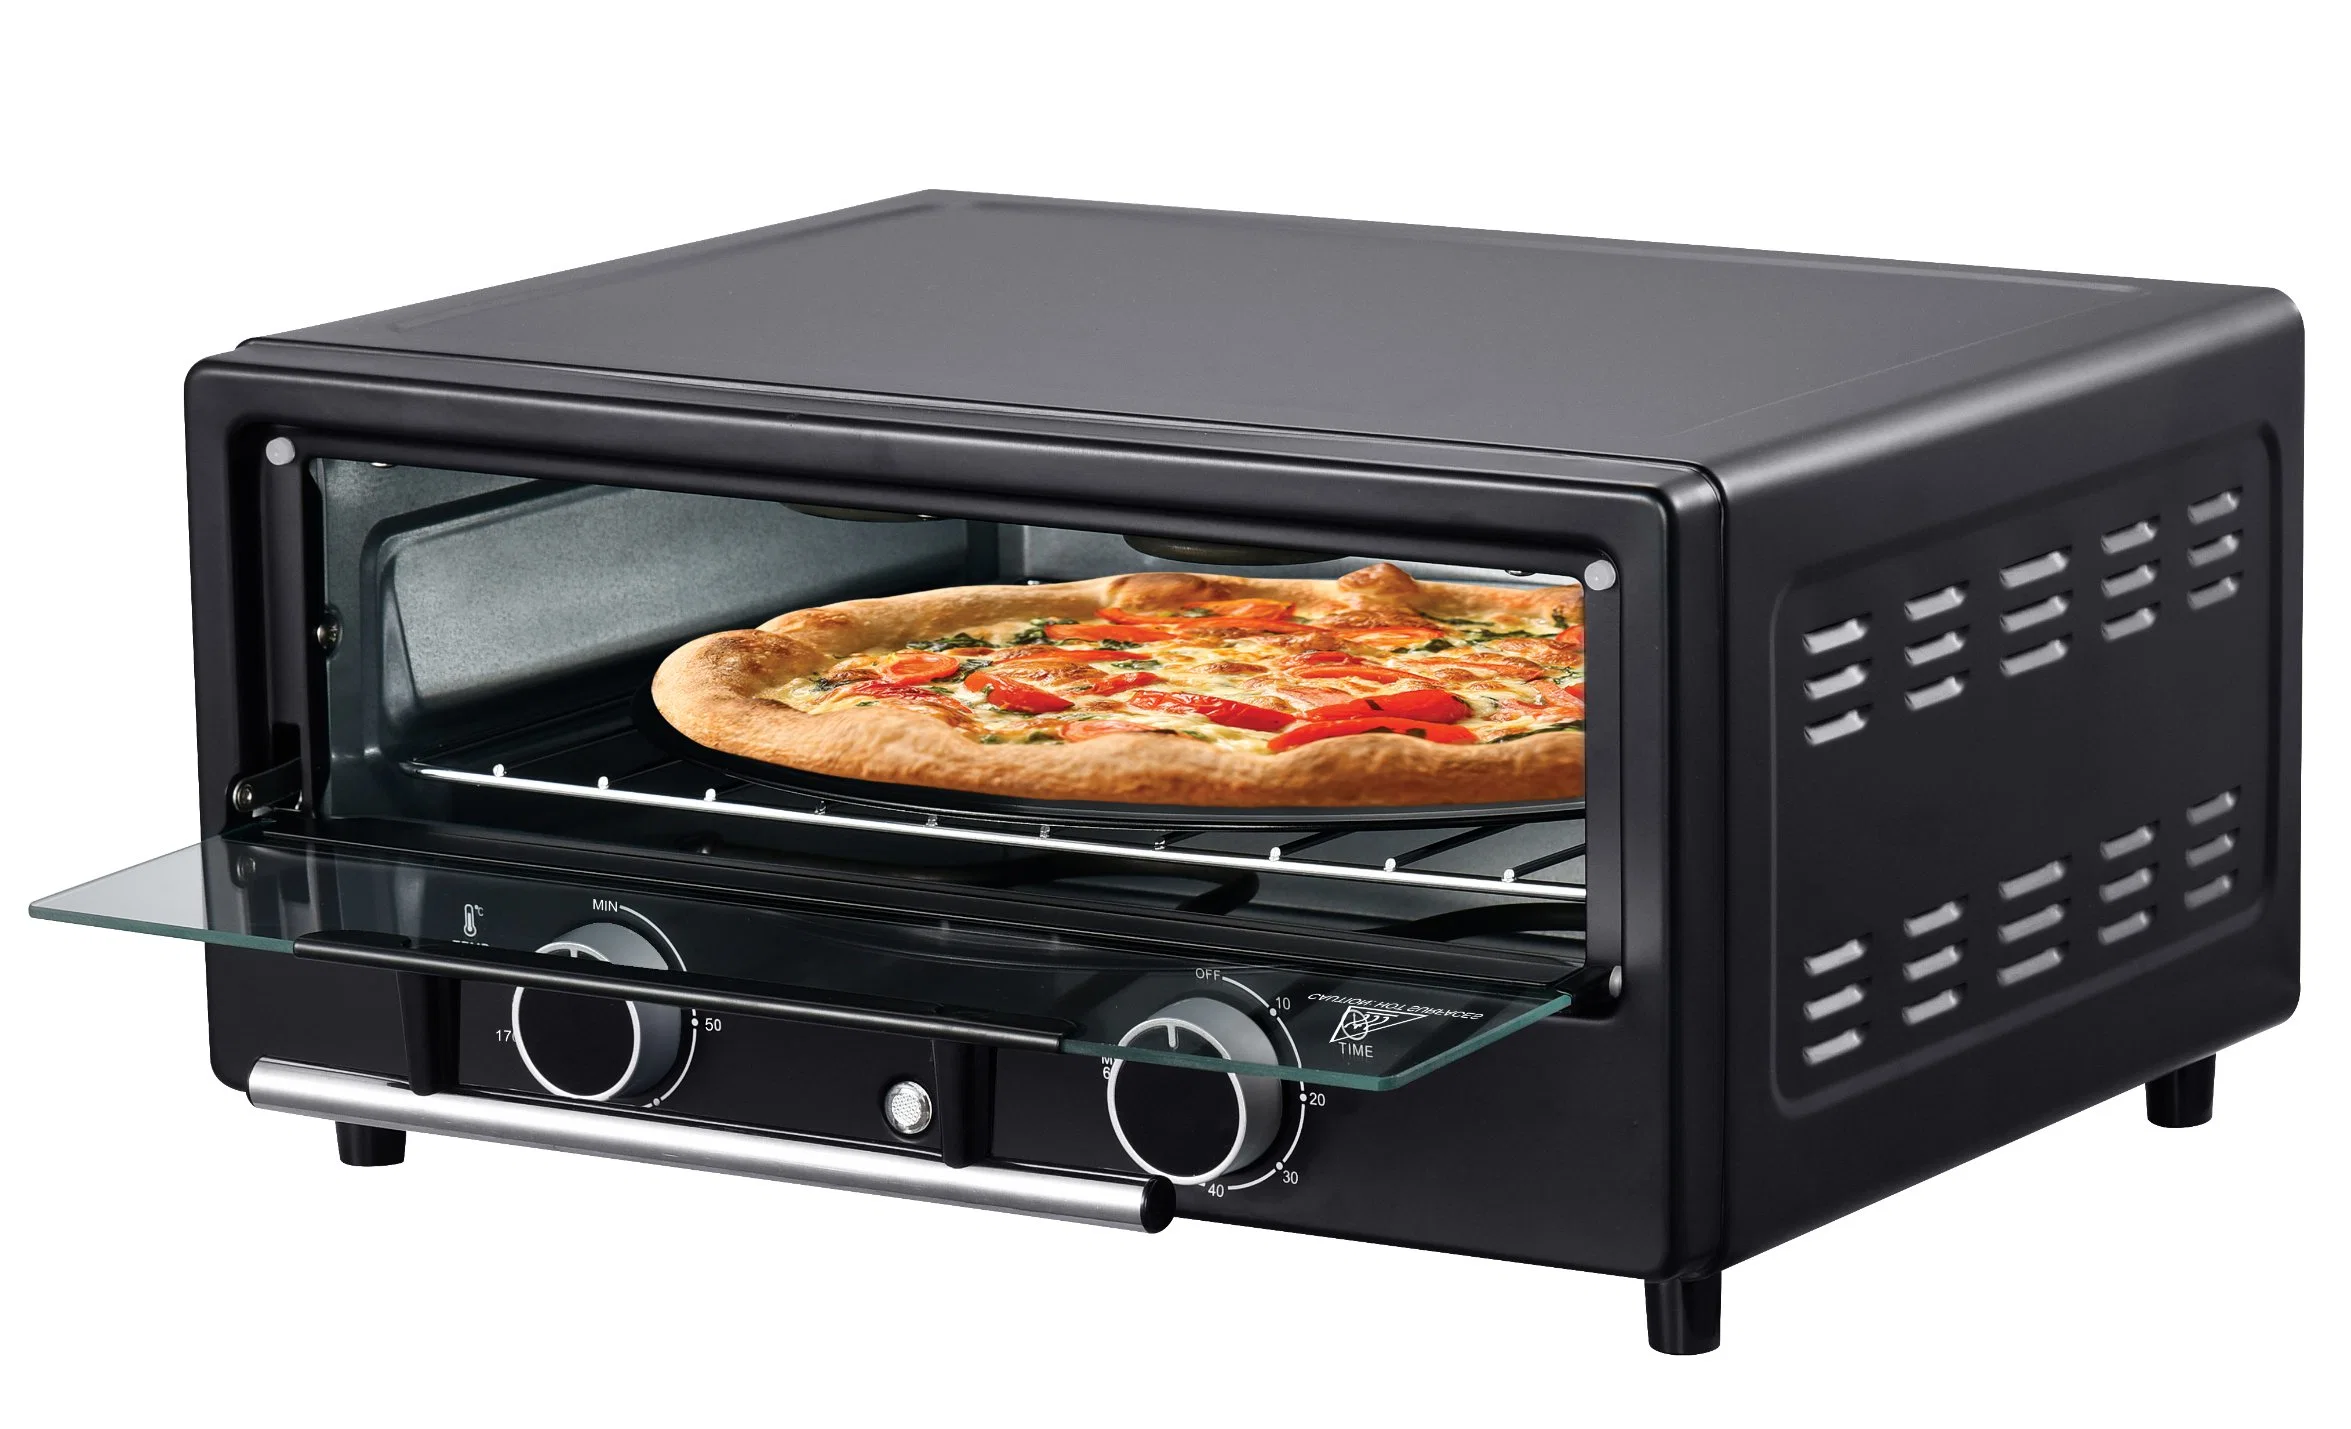 12 Inch New Stainless Steel Toaster Baking Roasted Electric Pizza Oven